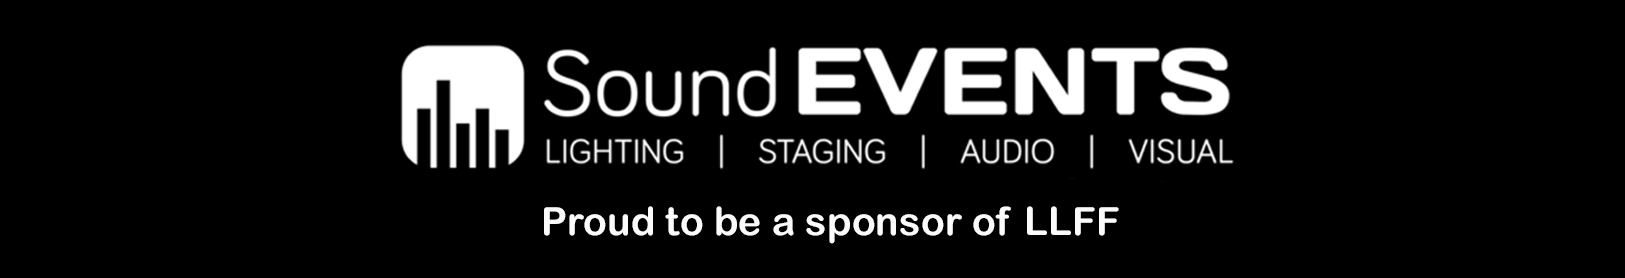 Sound Events : Lighting, Staging, Audio, Visual